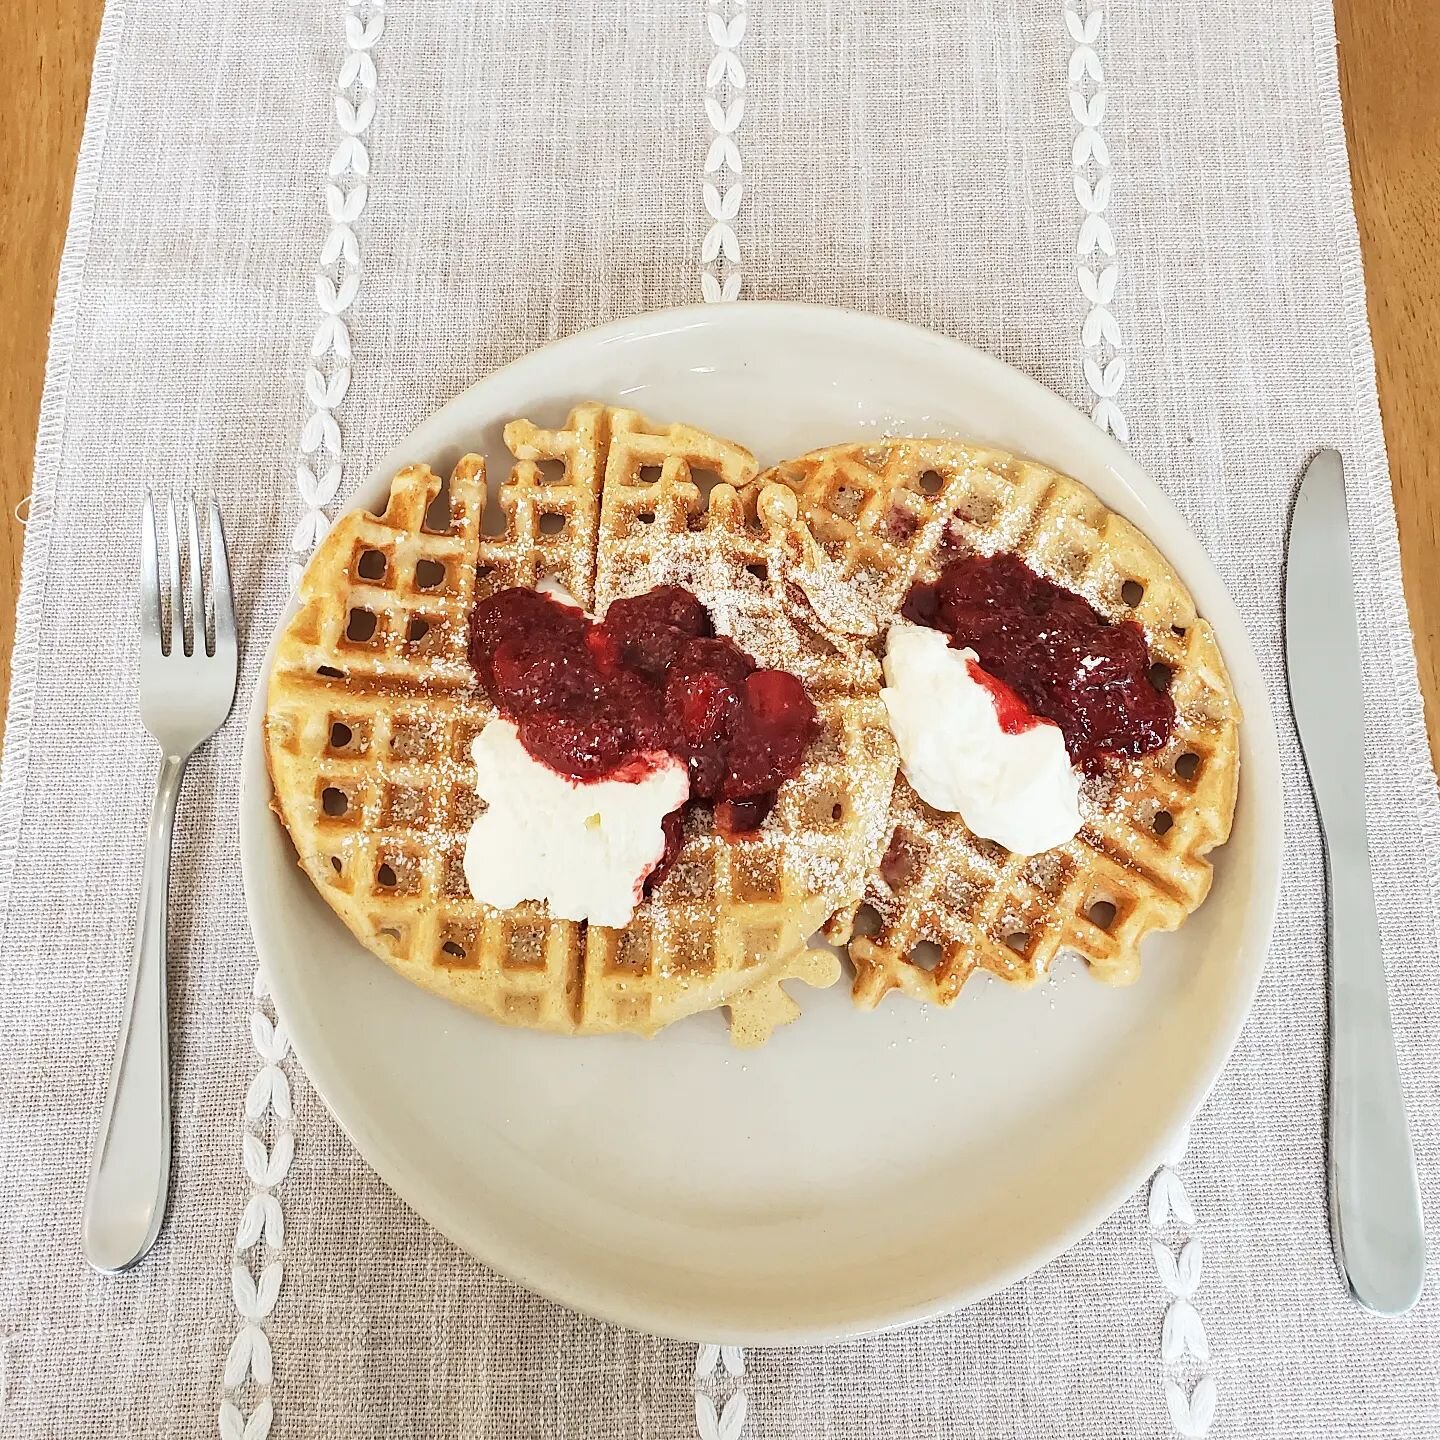 #sankofabirthsquad 
#appreciationpost 

Daaannnggg these were delicious! A lovely Grandmother made us waffles, whipped cream, and strawberry compote from scratch this morning to celebrate the birth of her grandbaby and to show her appreciation for ou